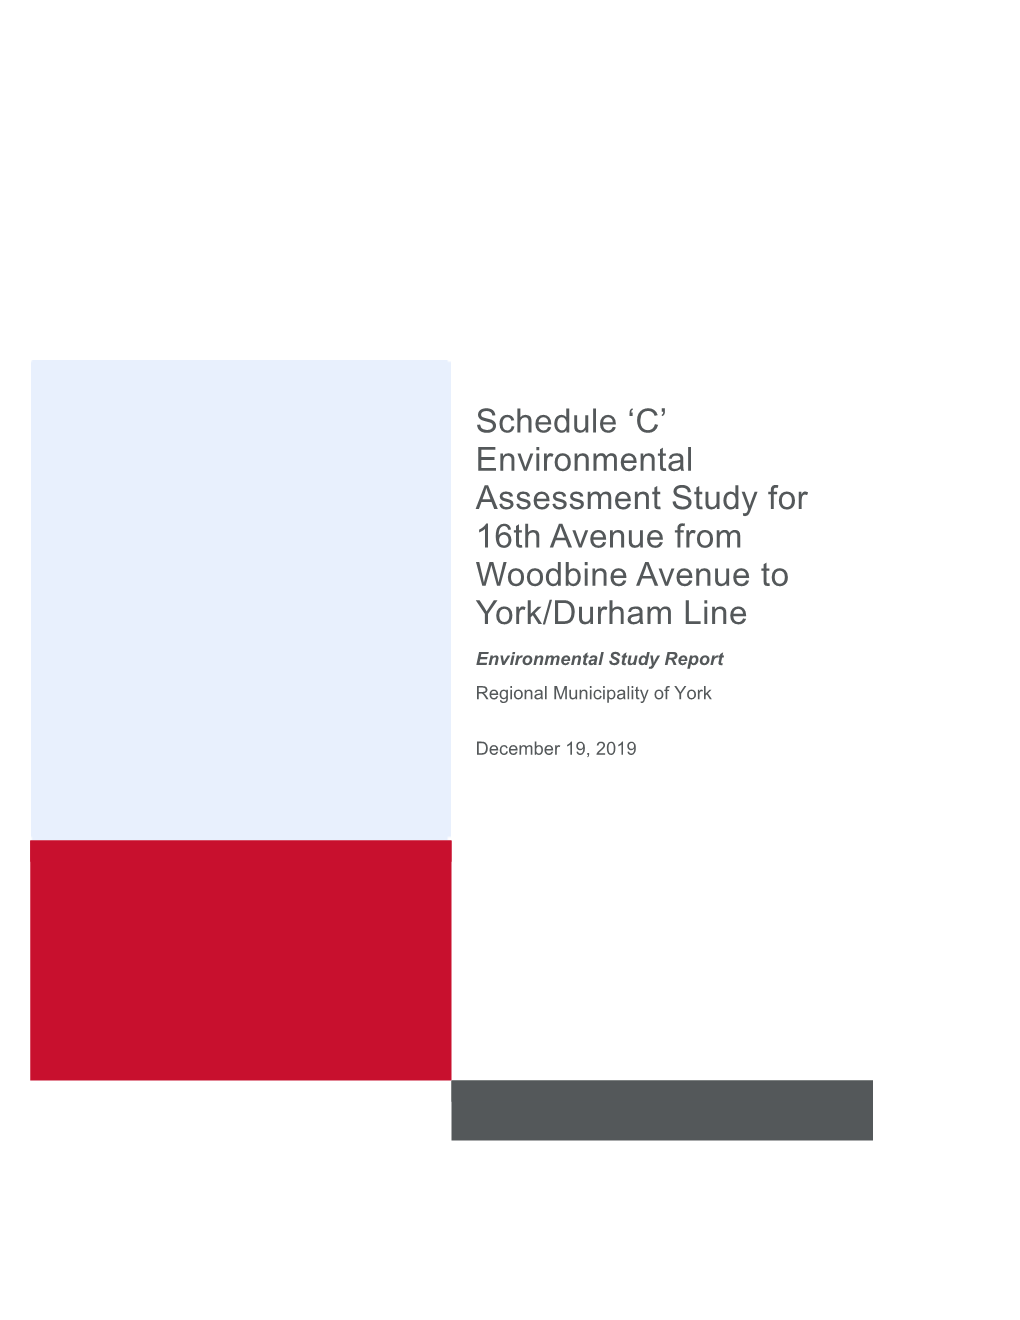 Schedule 'C' Environmental Assessment Study for 16Th Avenue from Woodbine Avenue to York/Durham Line